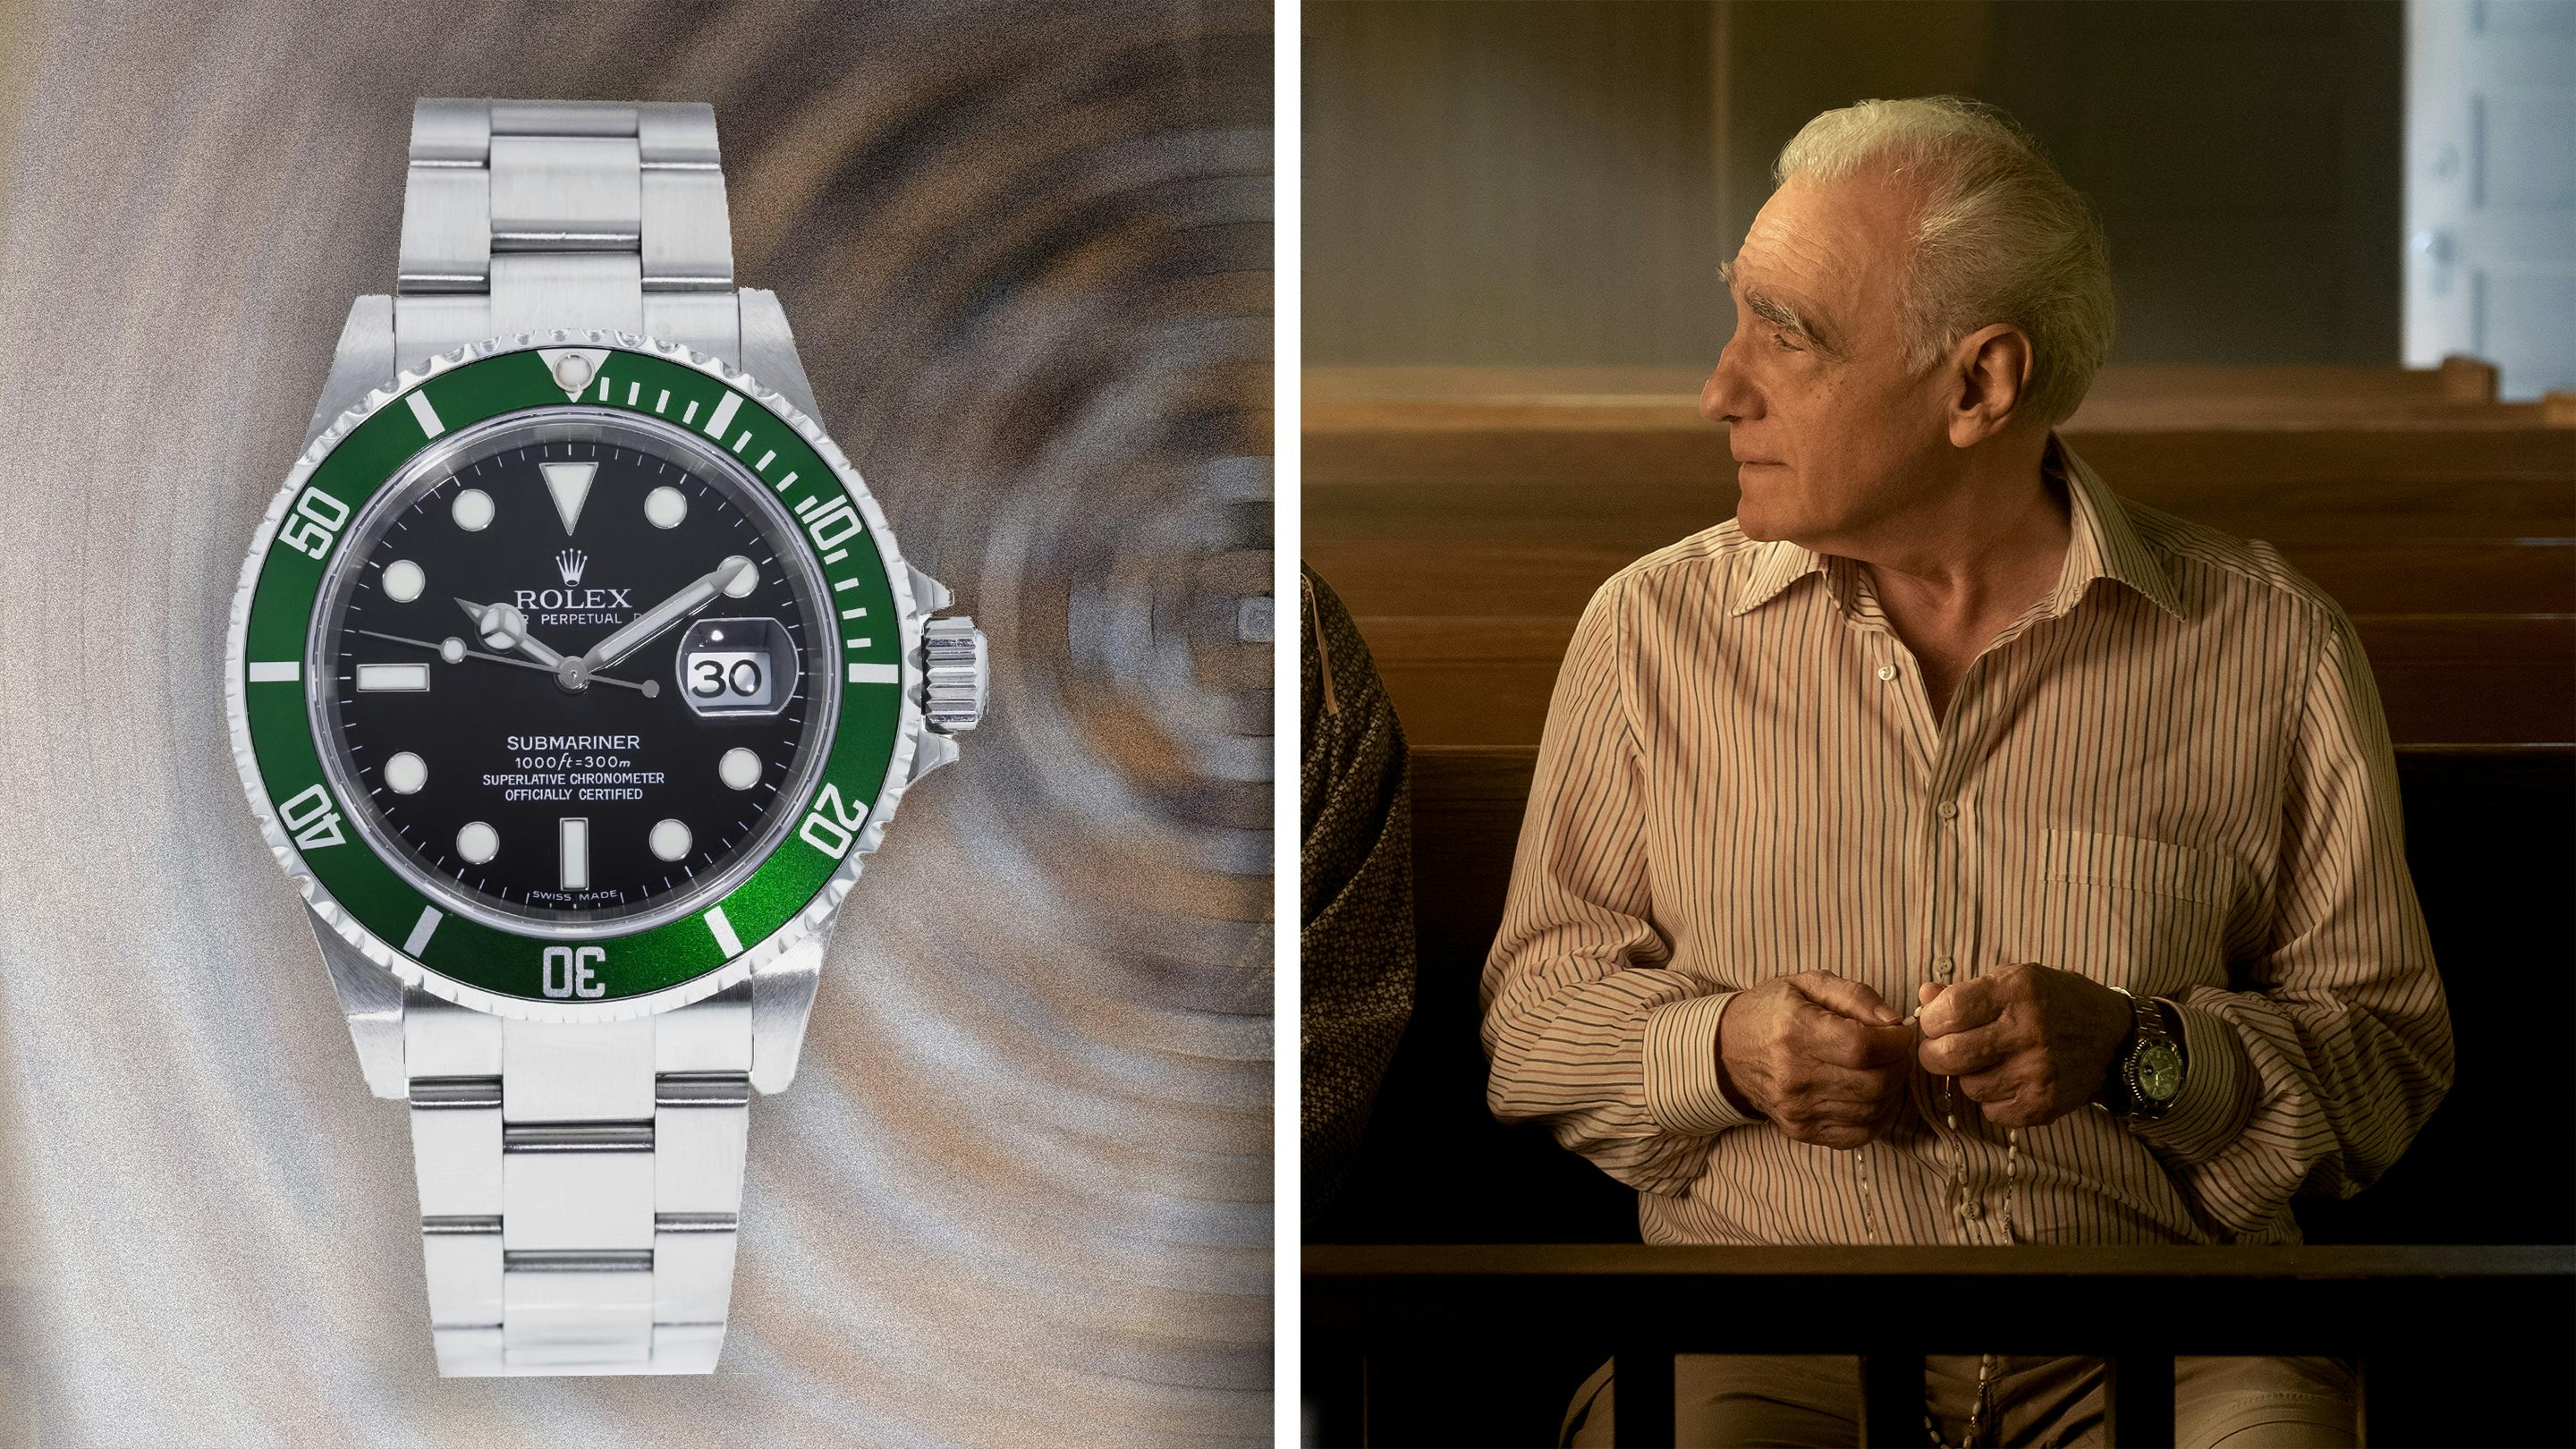 What Rolex (Only) Are You Wearing Today?